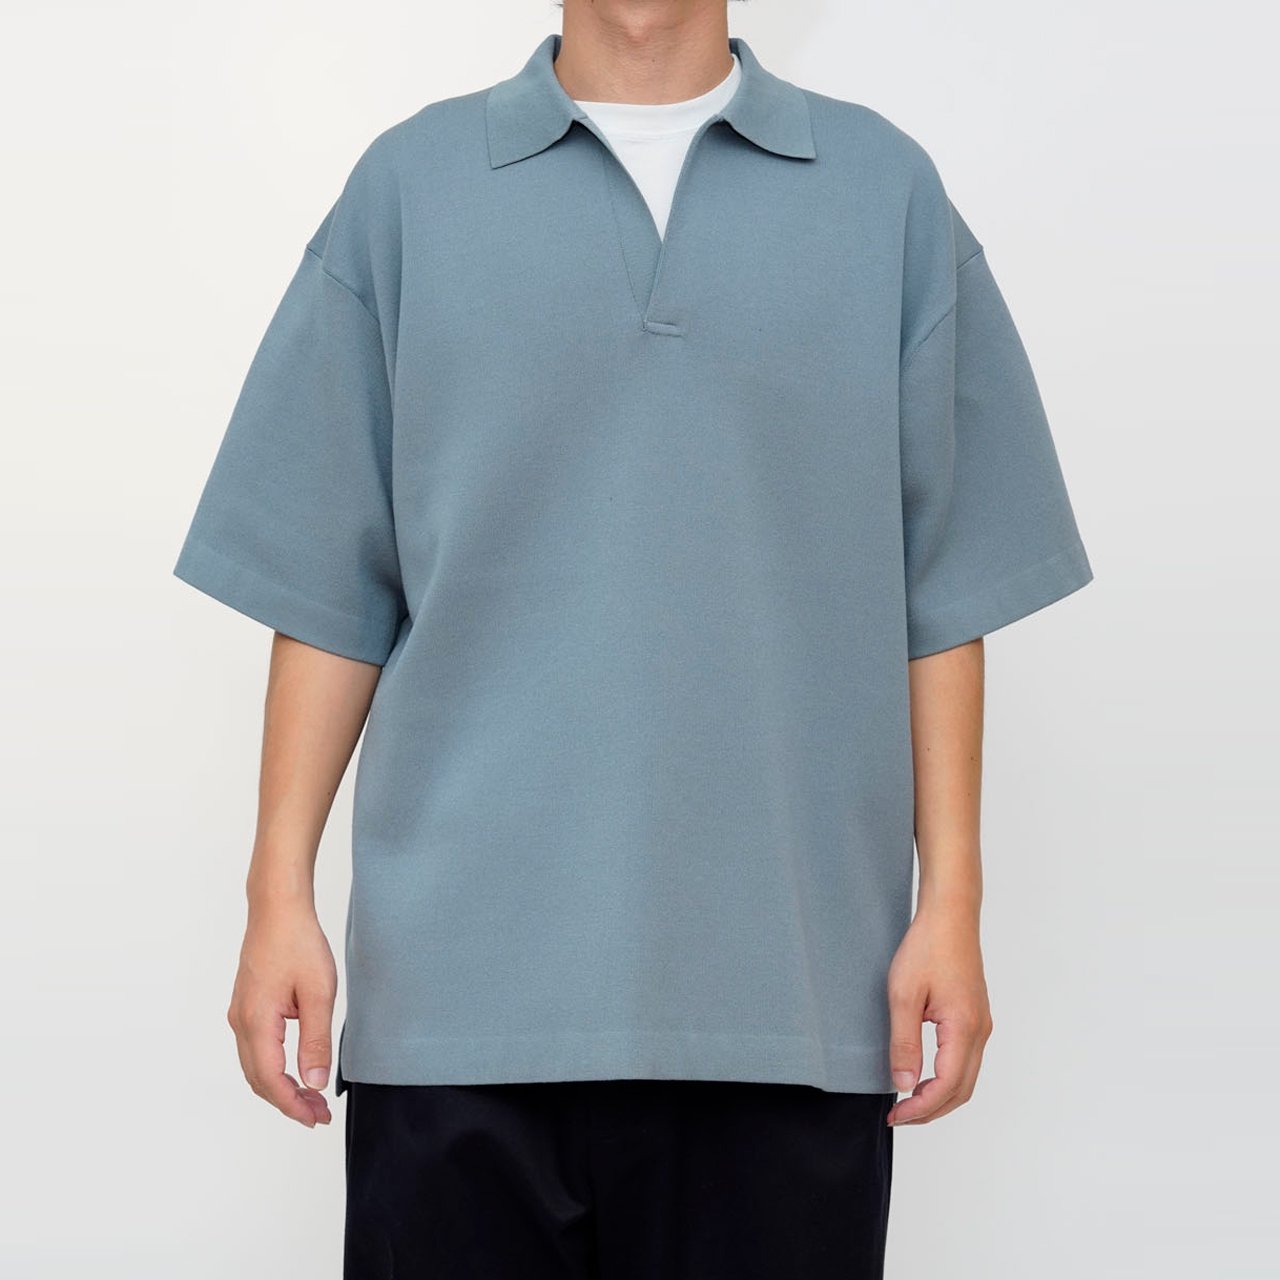 <img class='new_mark_img1' src='https://img.shop-pro.jp/img/new/icons5.gif' style='border:none;display:inline;margin:0px;padding:0px;width:auto;' />UNIVERSAL PRODUCTS (˥Сץ)SKIPPER SHORT SLEEVE KNIT SHIRTS BLUE GRAY